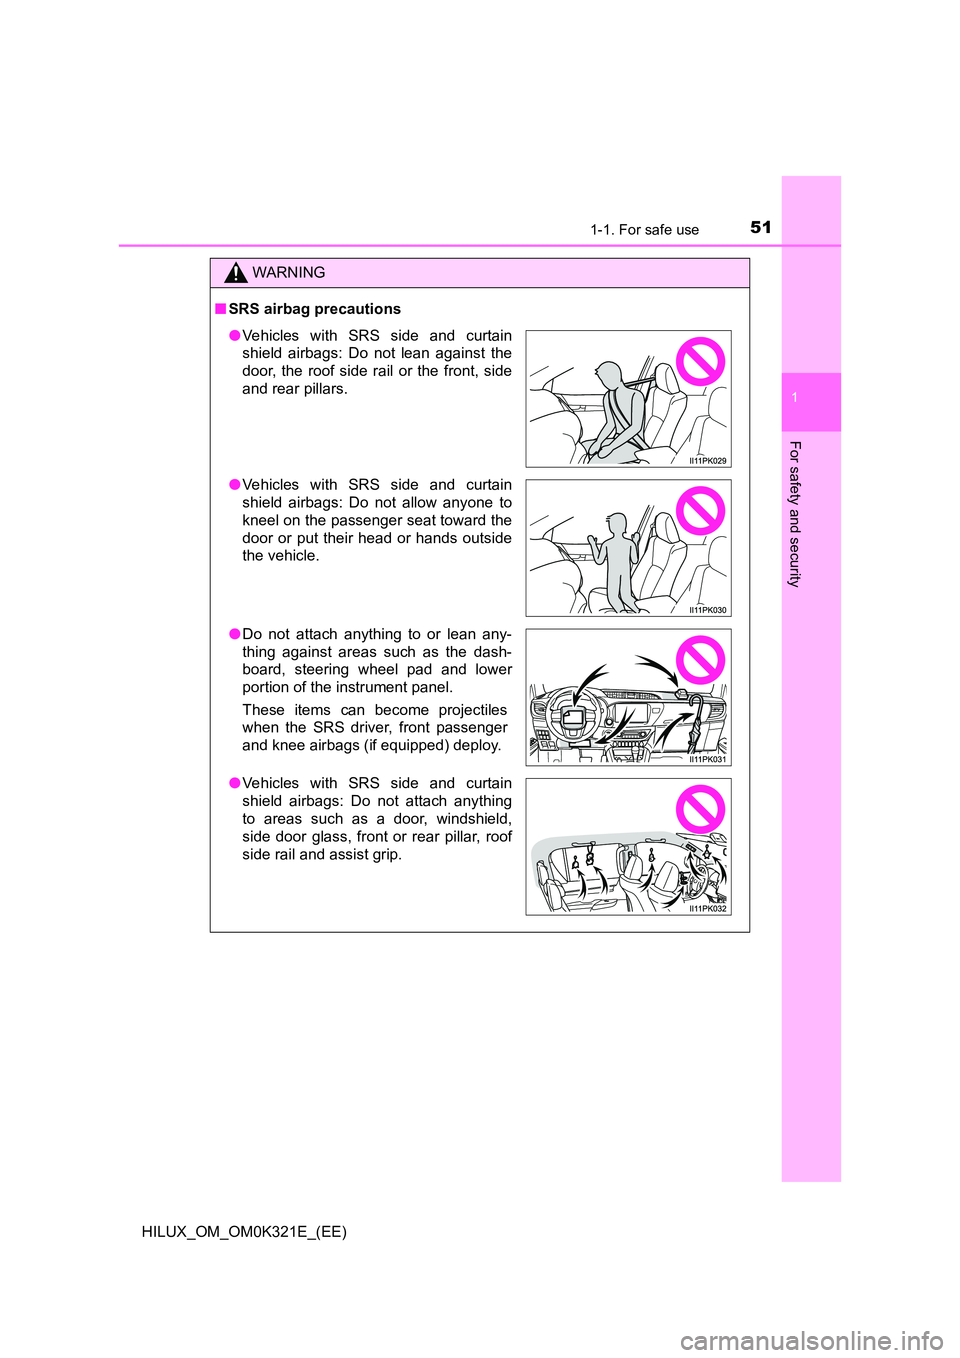 TOYOTA HILUX 2020  Owners Manual (in English) 511-1. For safe use
1
HILUX_OM_OM0K321E_(EE)
For safety and security
WARNING
■SRS airbag precautions
●Vehicles with SRS side and curtain 
shield airbags: Do not lean against the 
door, the roof si